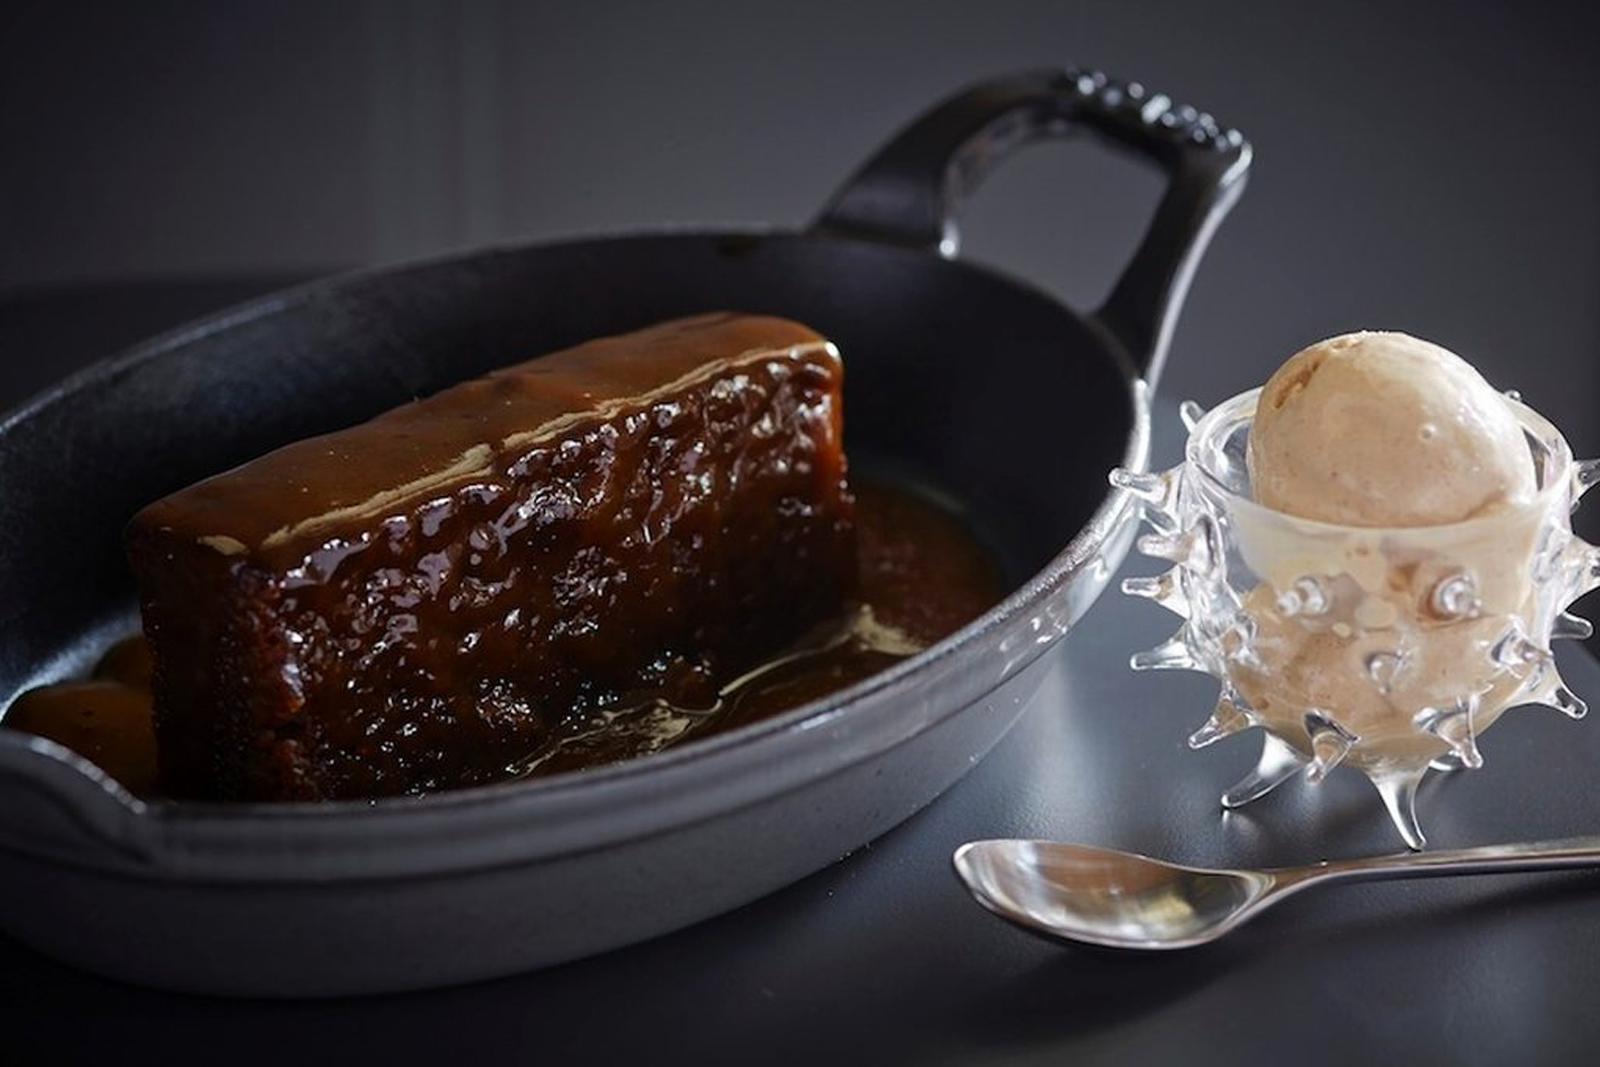 Menu Design by Ron Wan. Toffee Pudding Promotion at The Pawn's 2/F Tom Aikens Kitchen in Wan Chai, Hong Kong